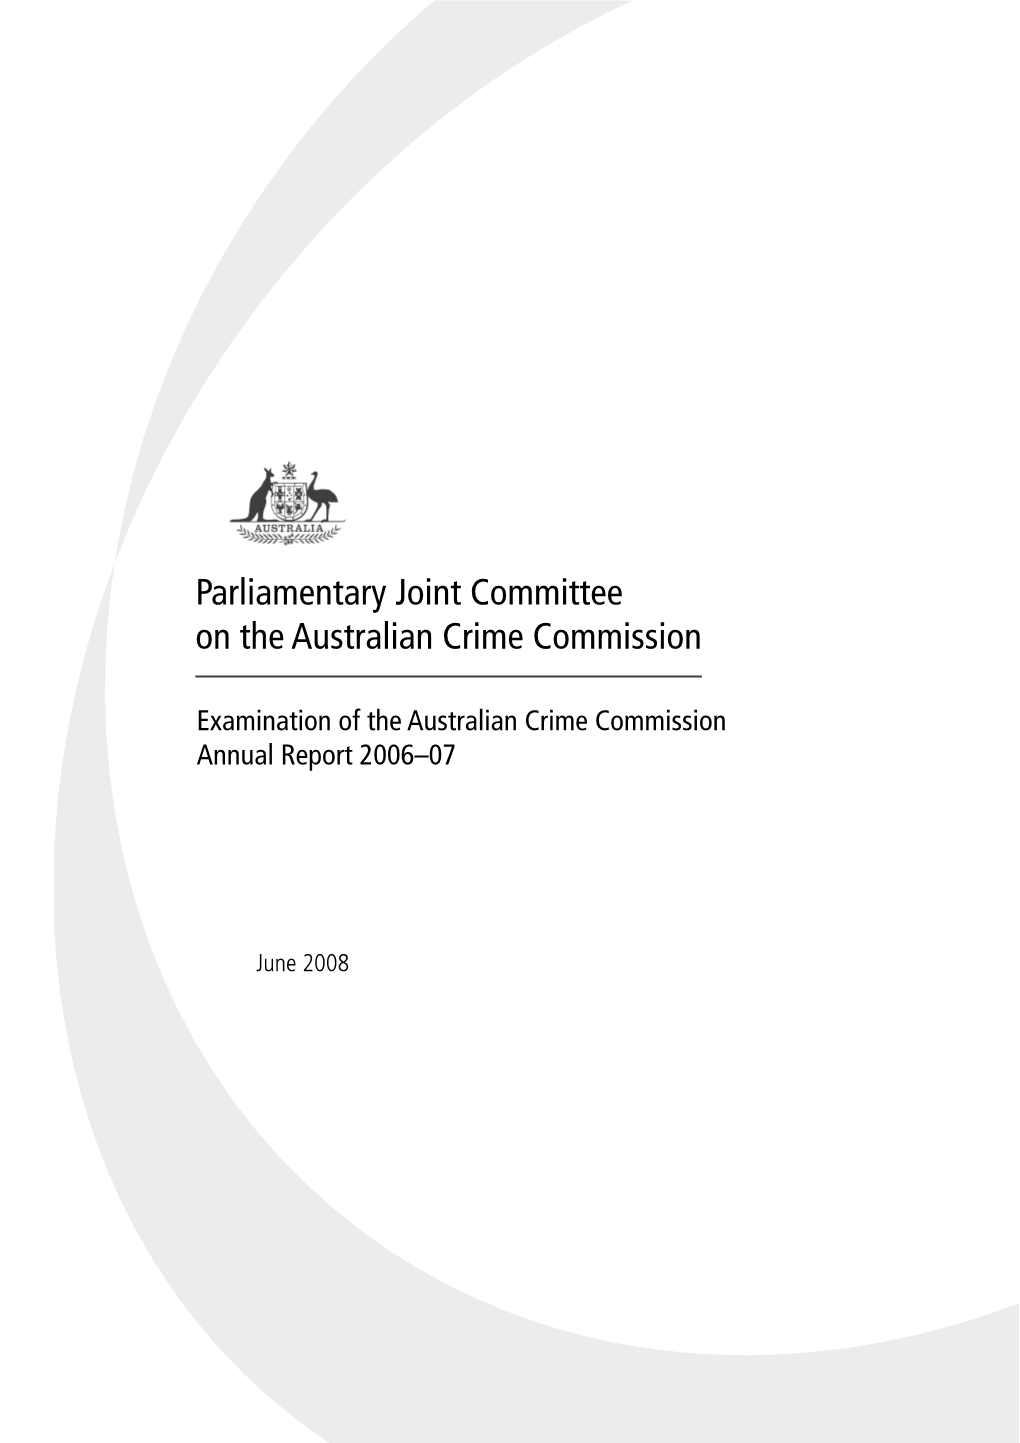 Examination of the Australian Crime Commission Annual Report 2006–07